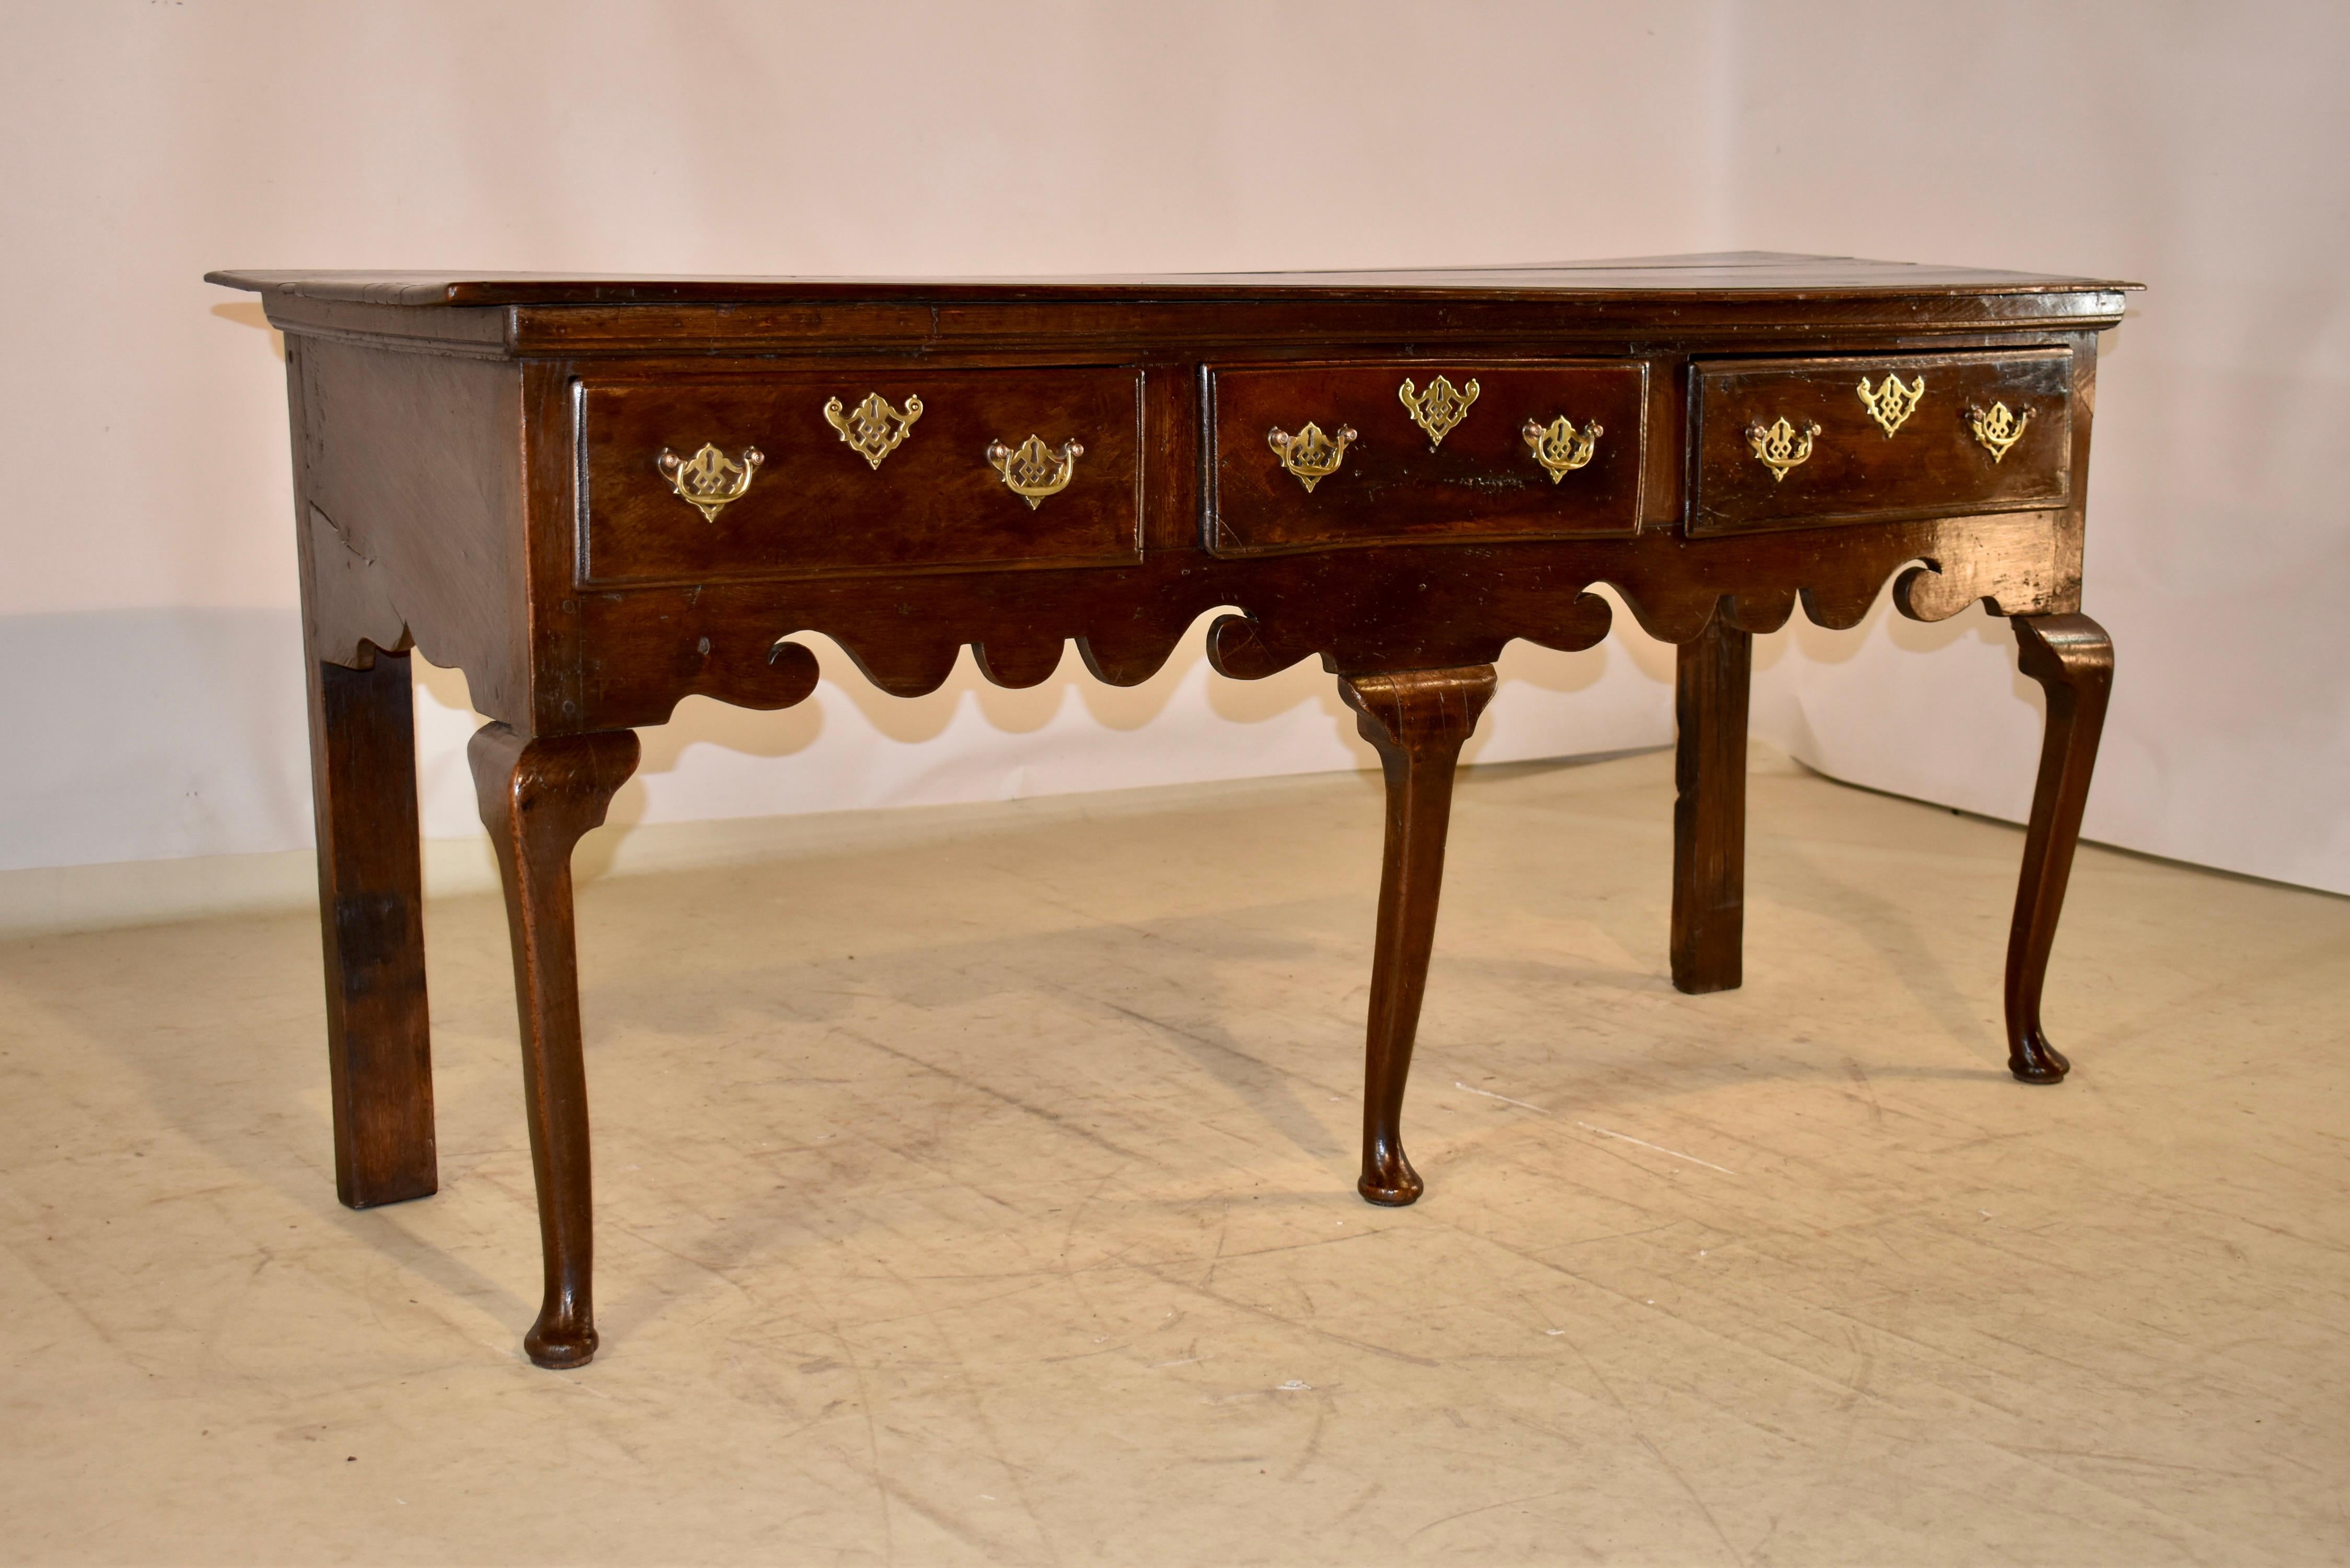 Early 18th Century English Oak Sideboard In Good Condition For Sale In High Point, NC